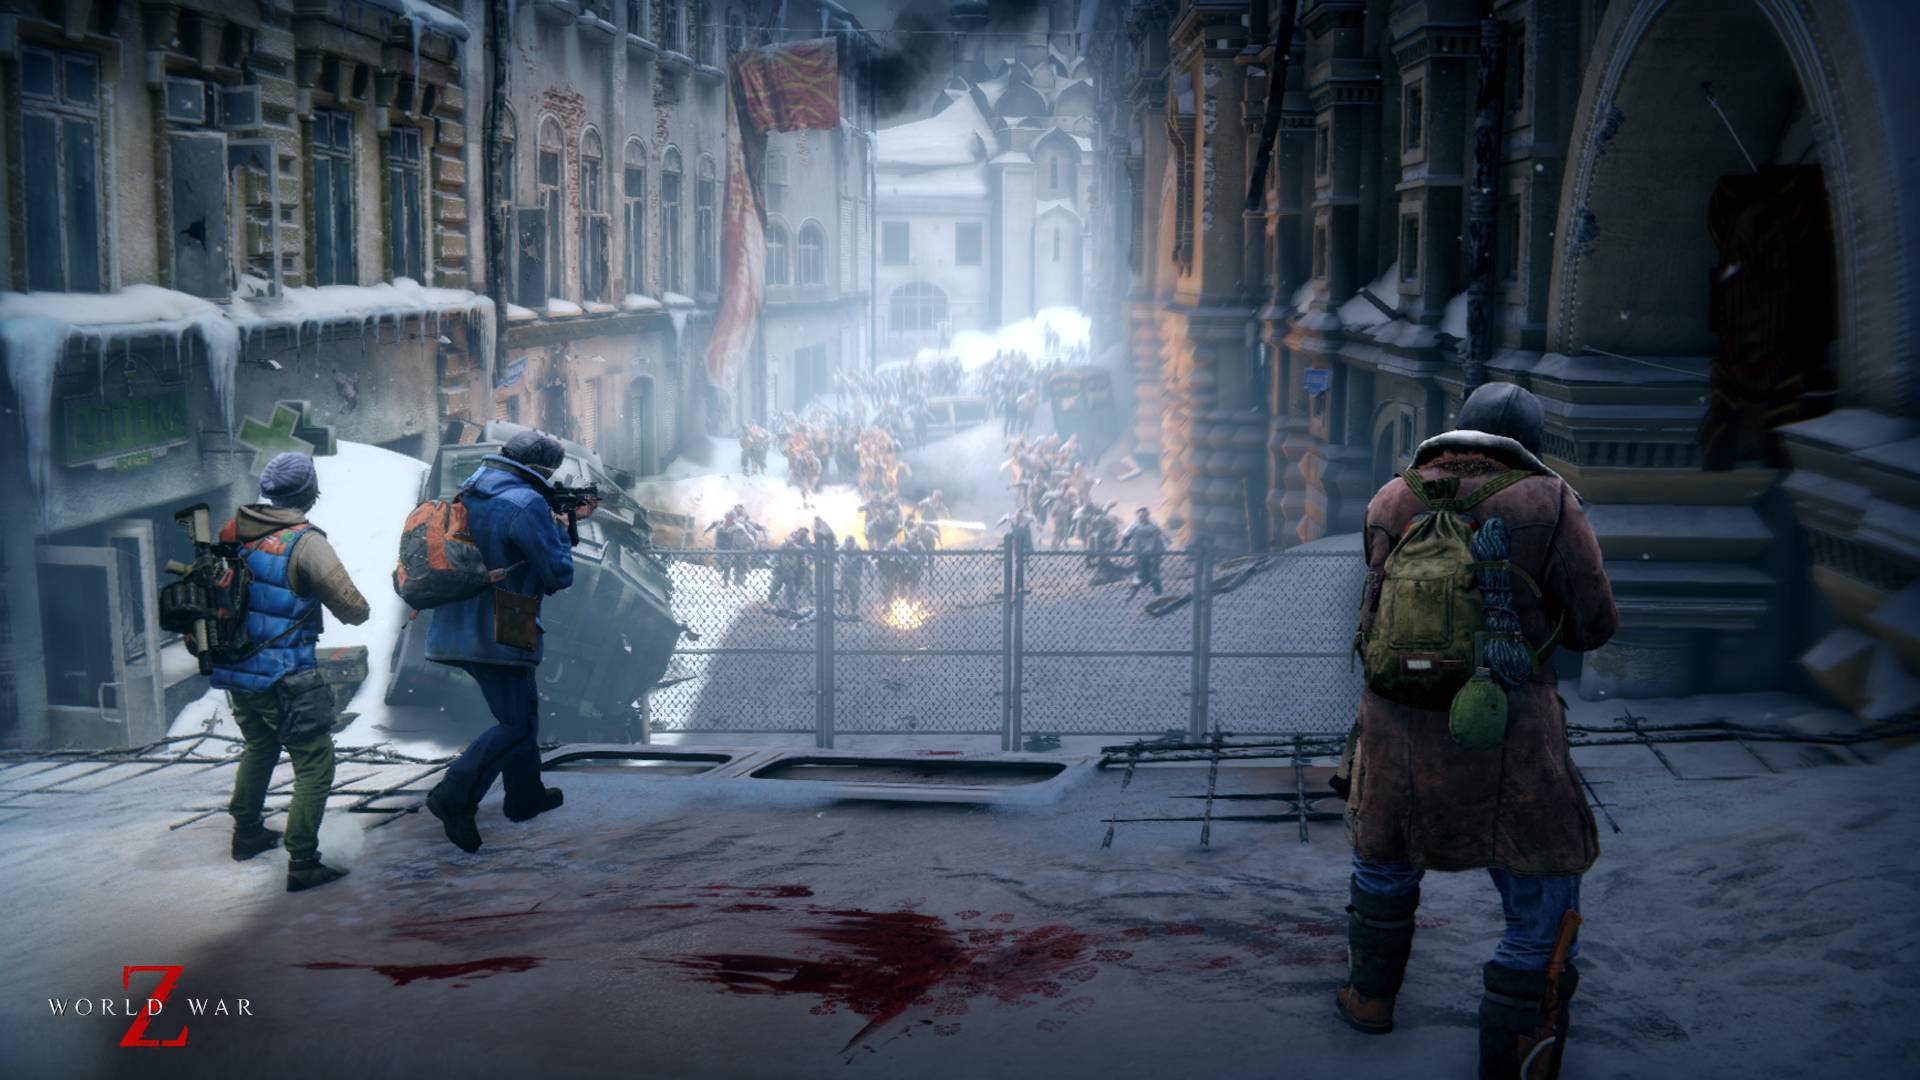 where can i buy world war z game pc